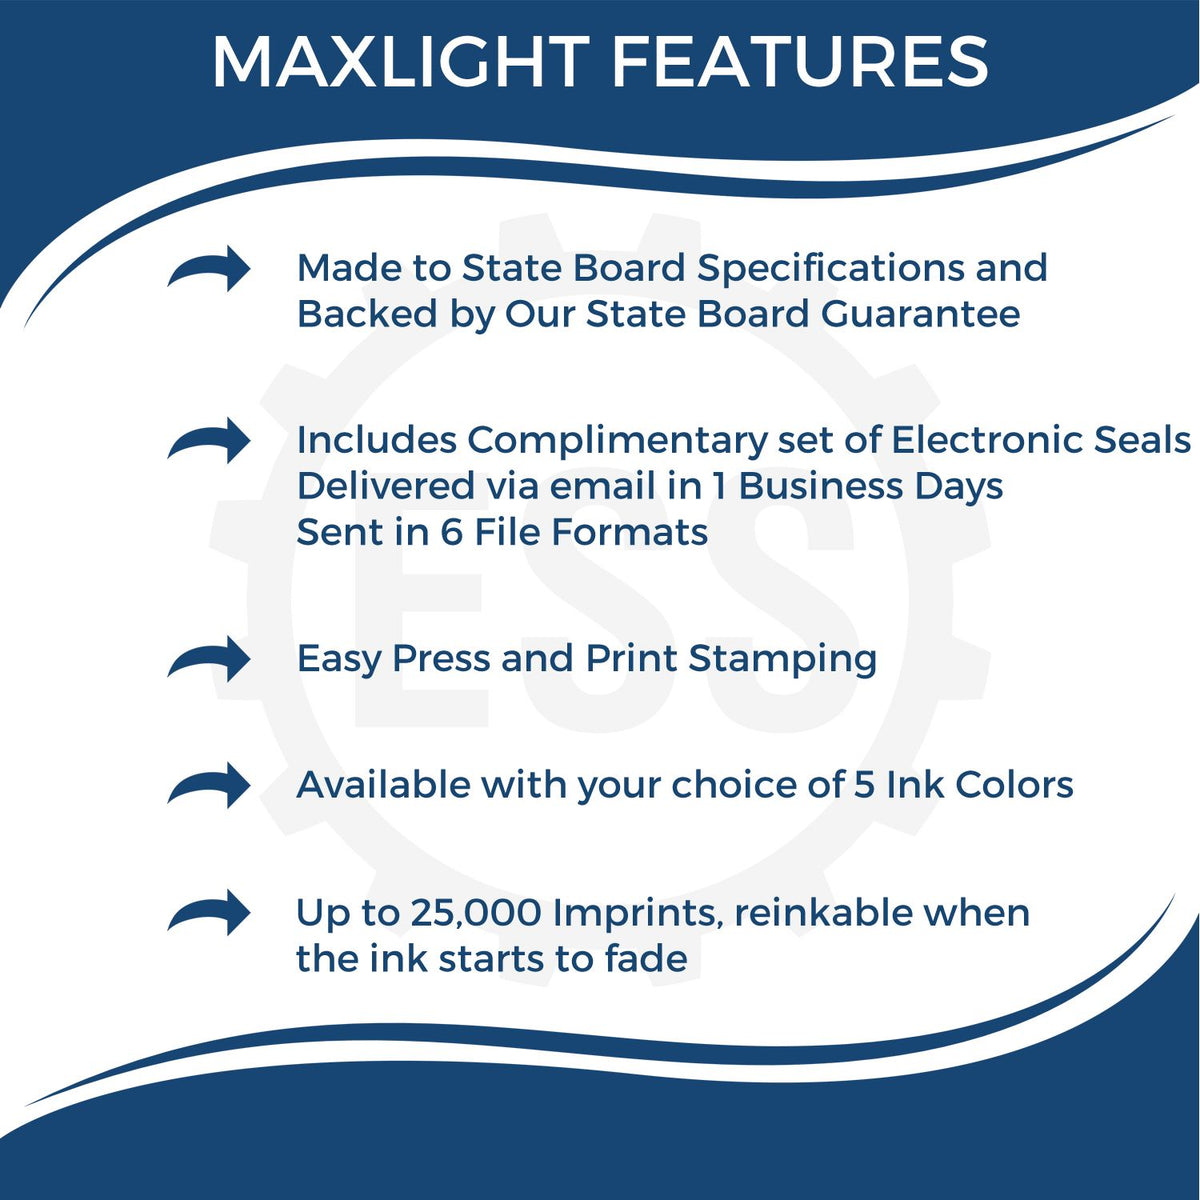 A picture of an infographic highlighting the selling points for the MaxLight Premium Pre-Inked Delaware State Seal Notarial Stamp